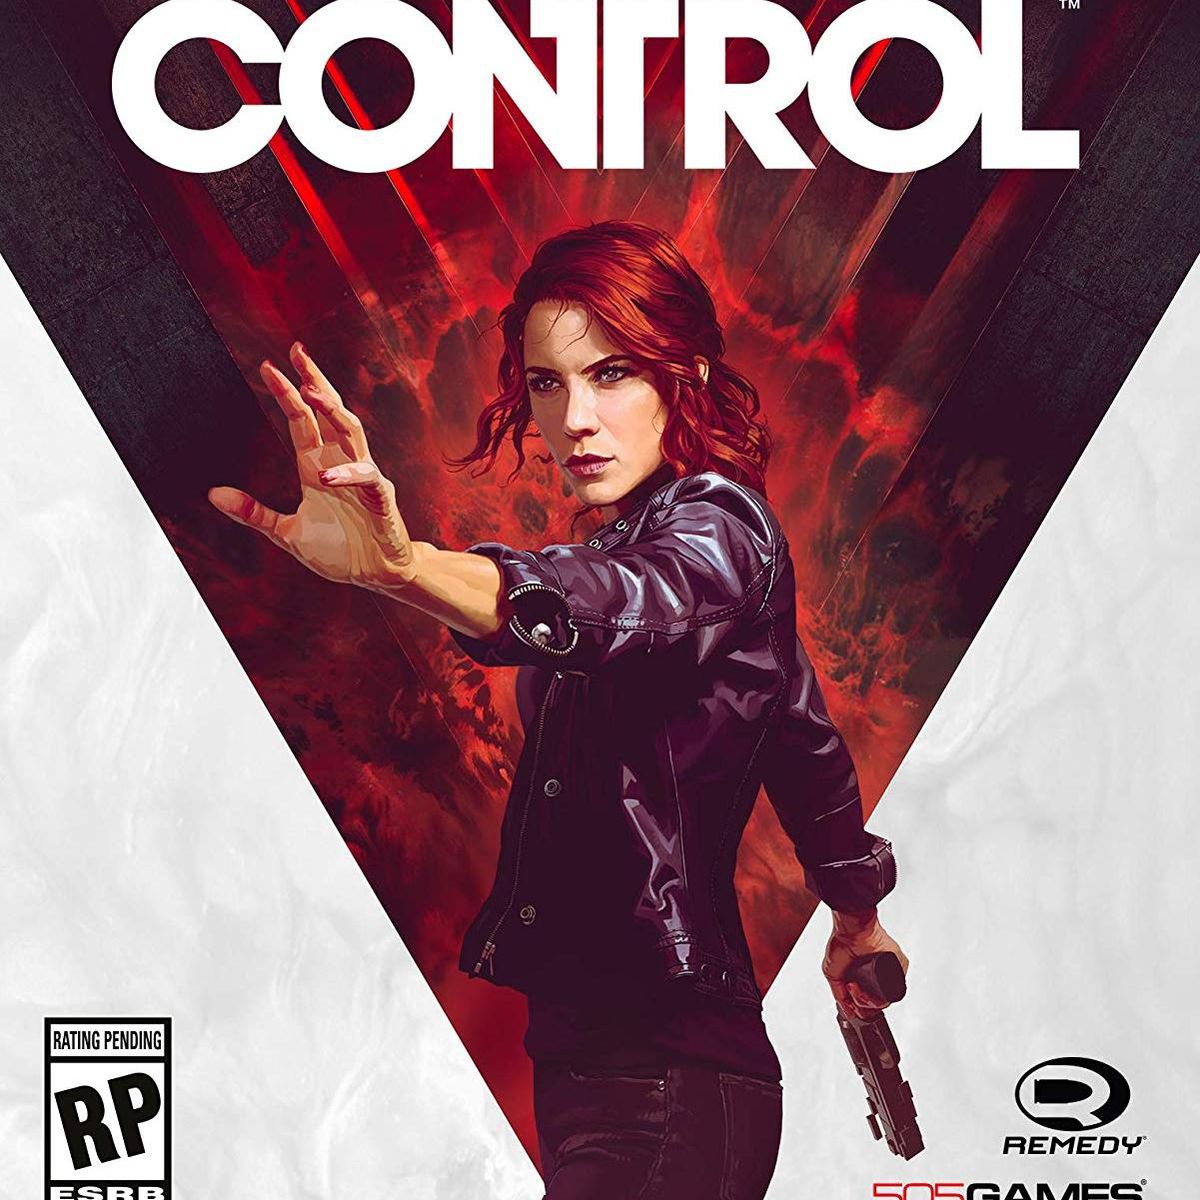 Cover art for Control featuring protagonist Jessie with hand outstretched in front of a red triangle on a white background 